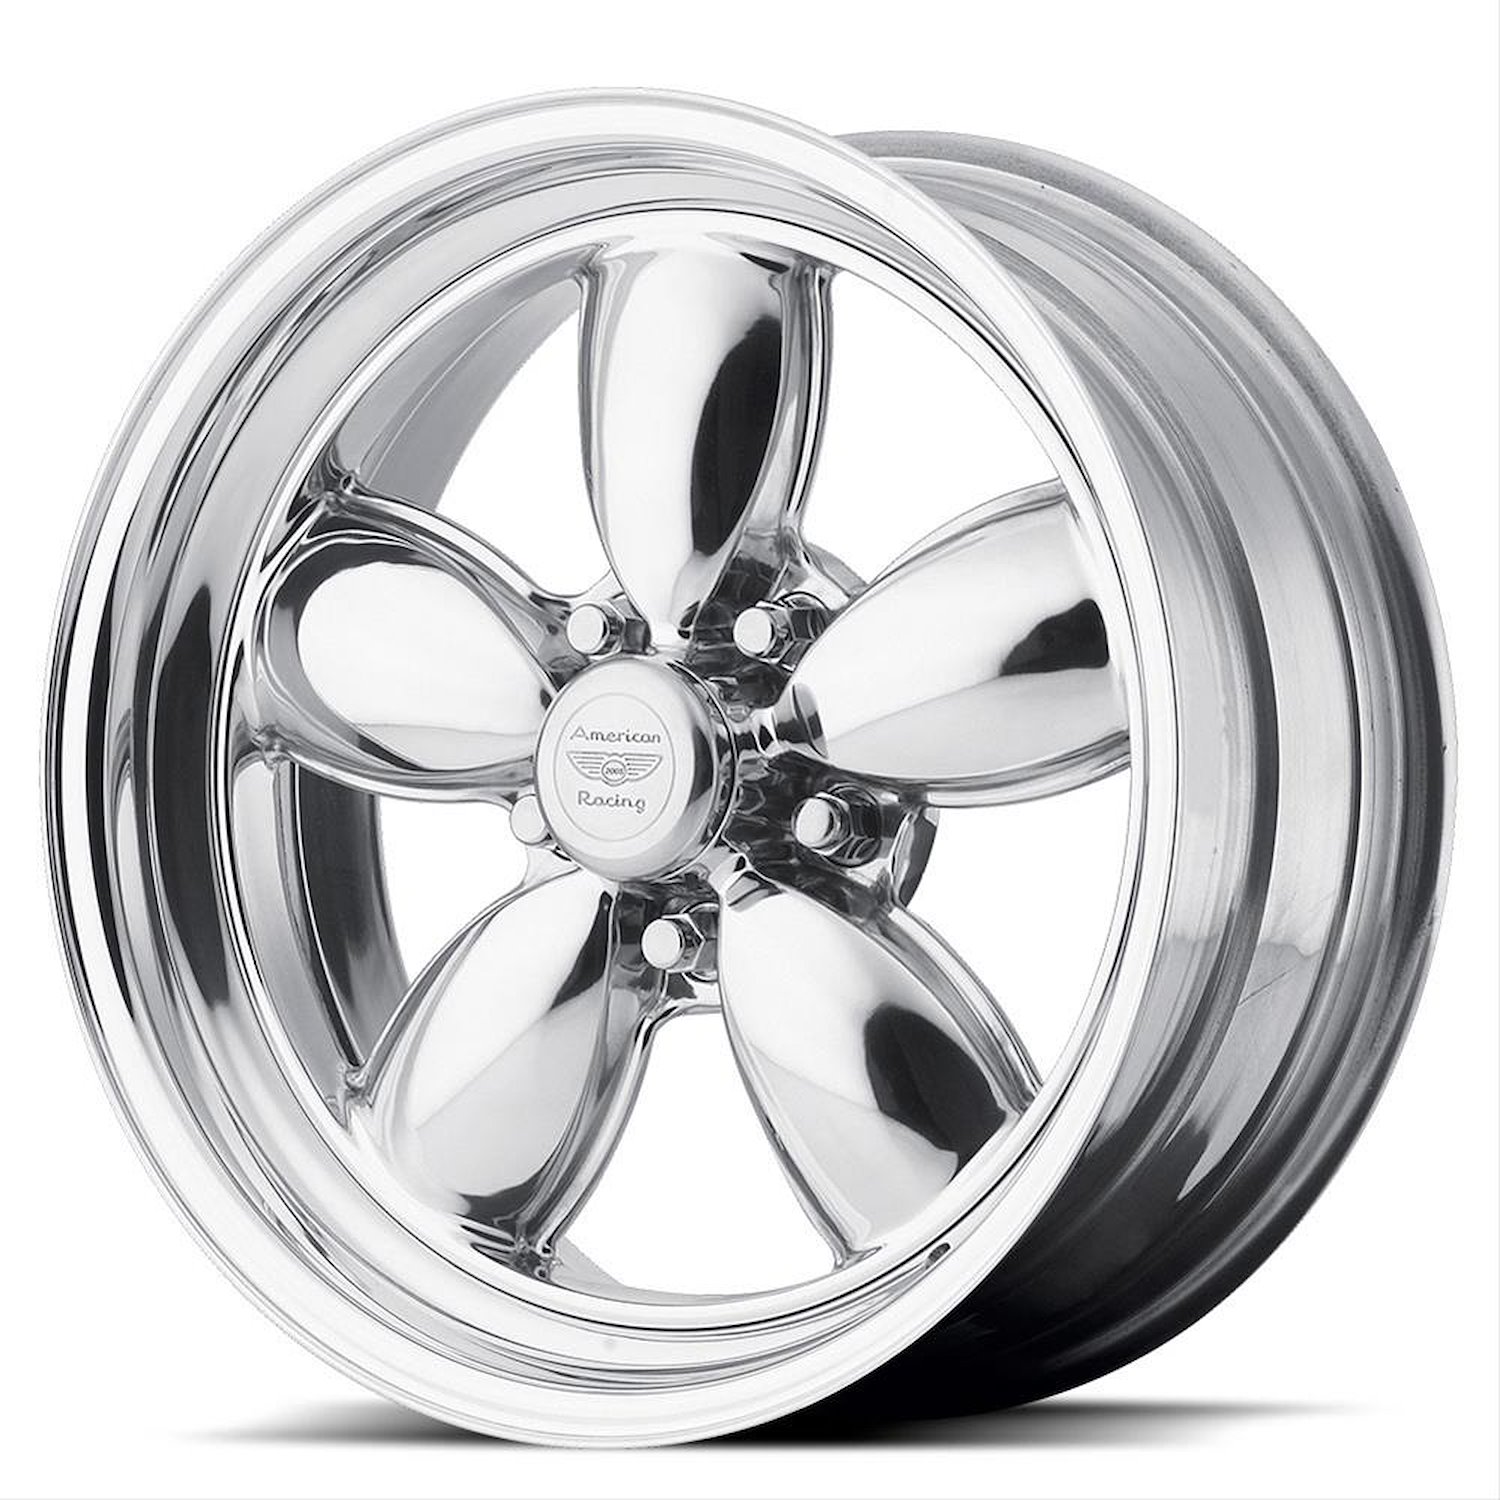 AMERICAN RACING CLASSIC 200S TWO-PIECE POLISHED 17 x 9.5 5x4.5 6 5.49